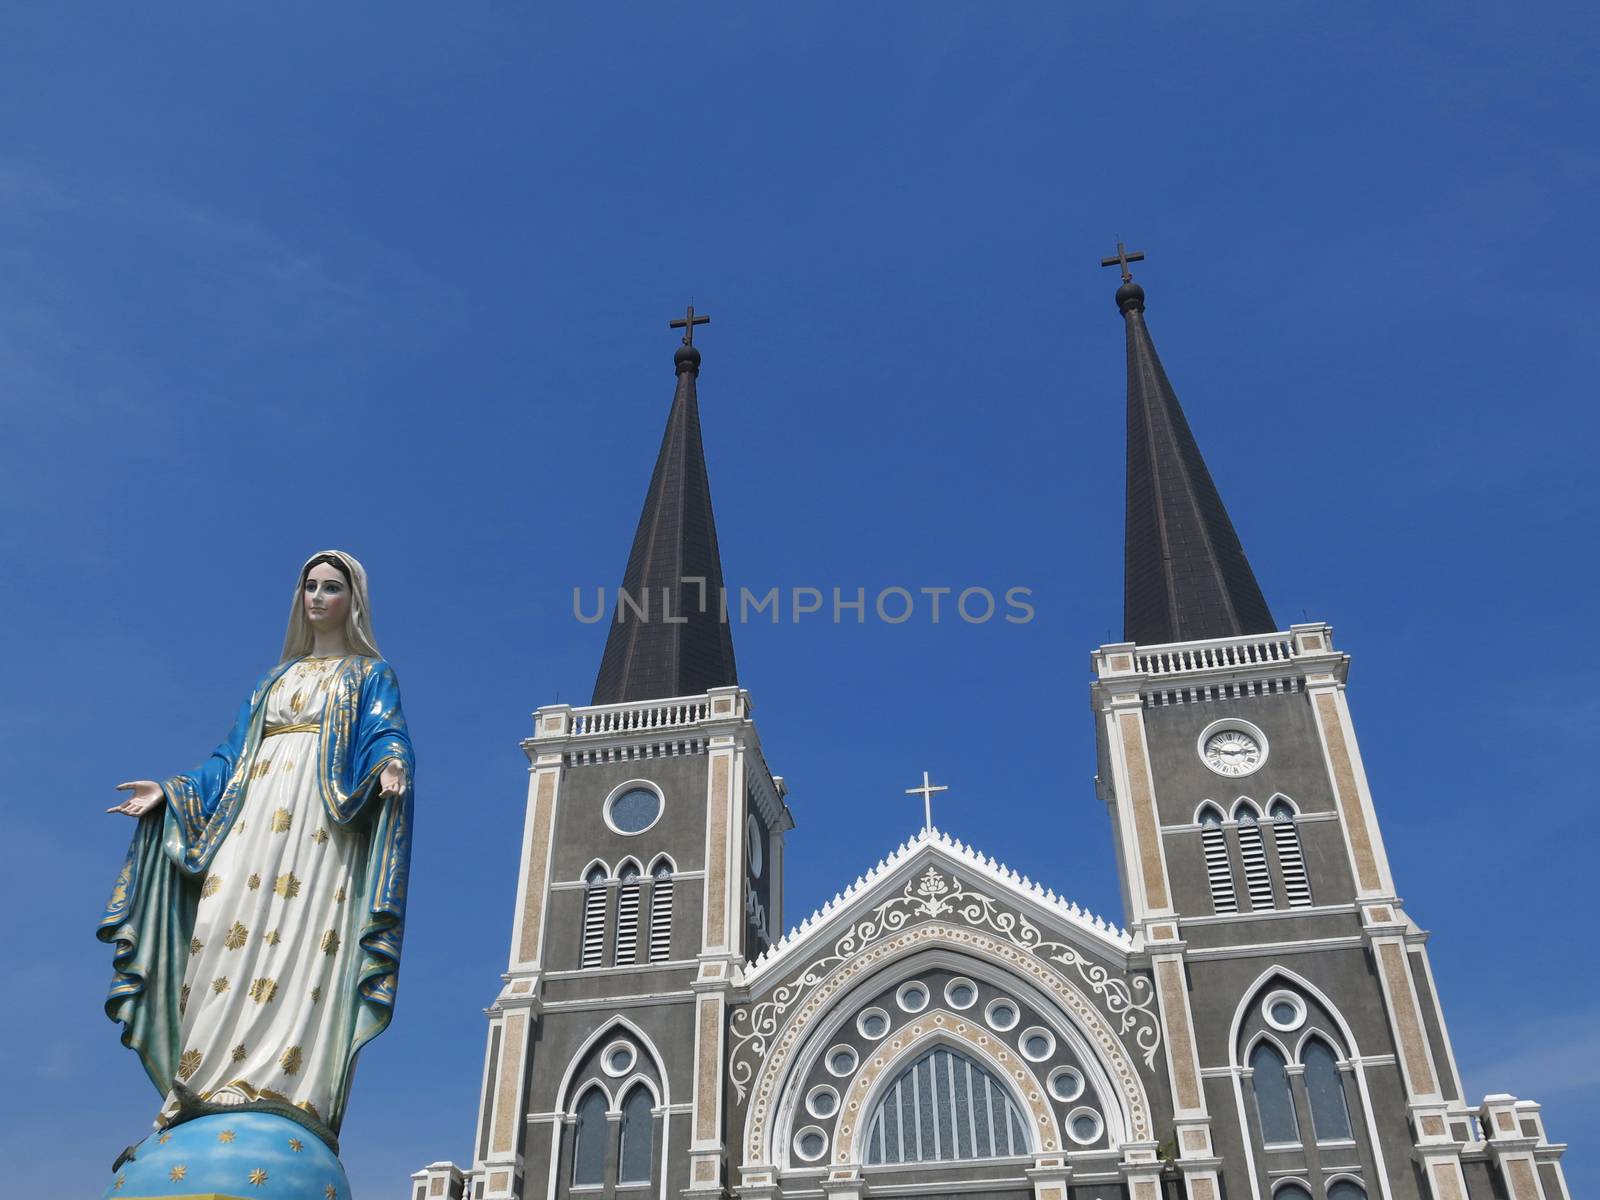 Virgin mary statue in front of church on blue sky background by asiandelight